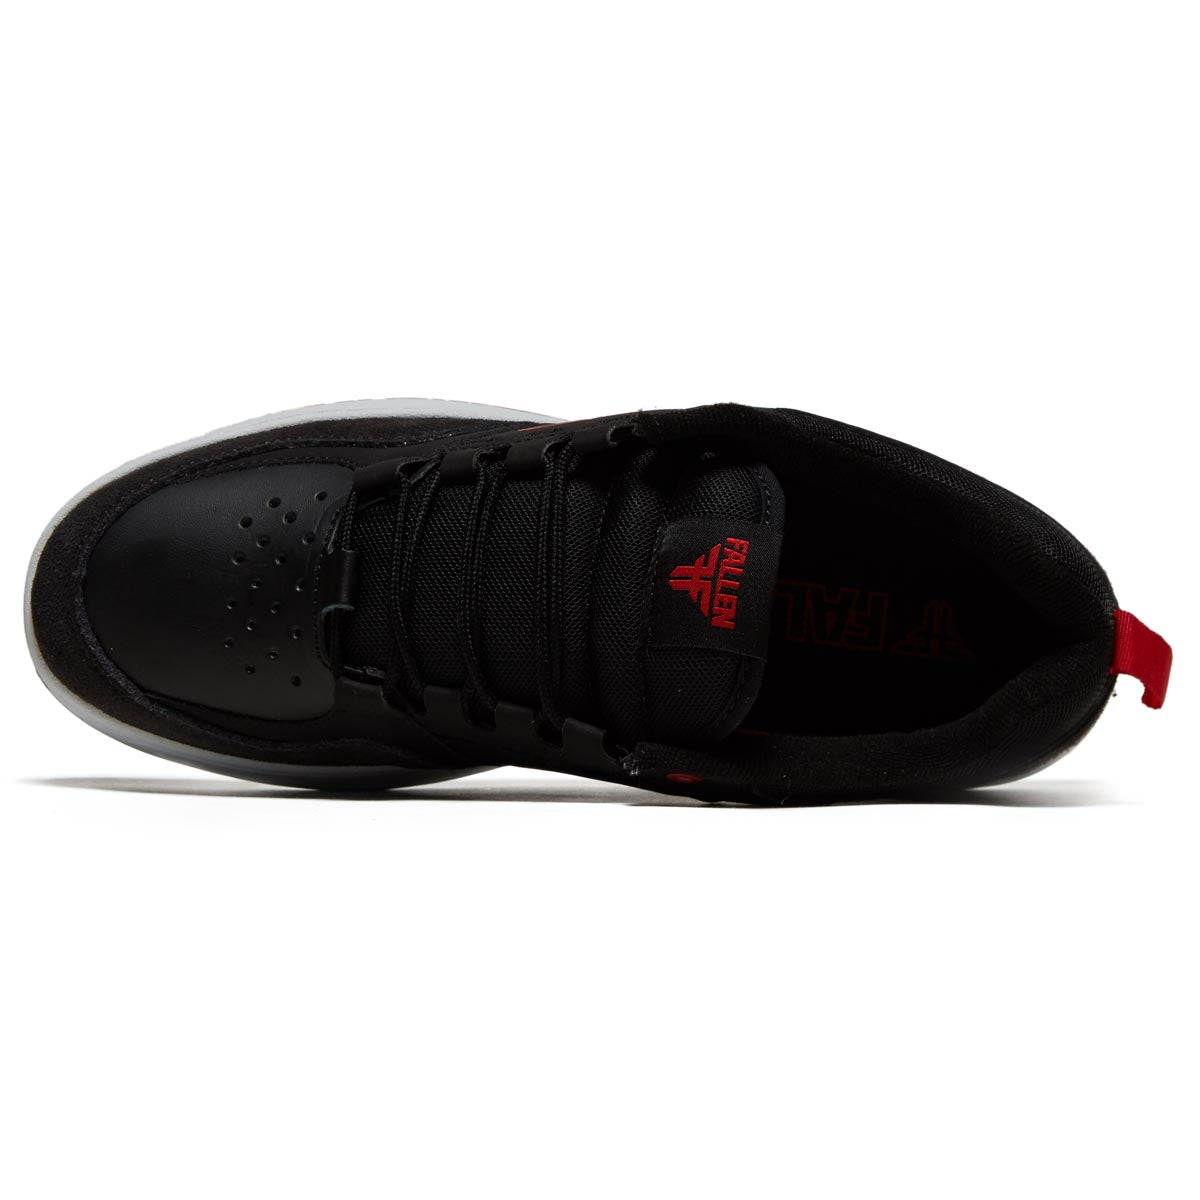 Fallen The Crest Shoes - Black/Gray/Red image 3